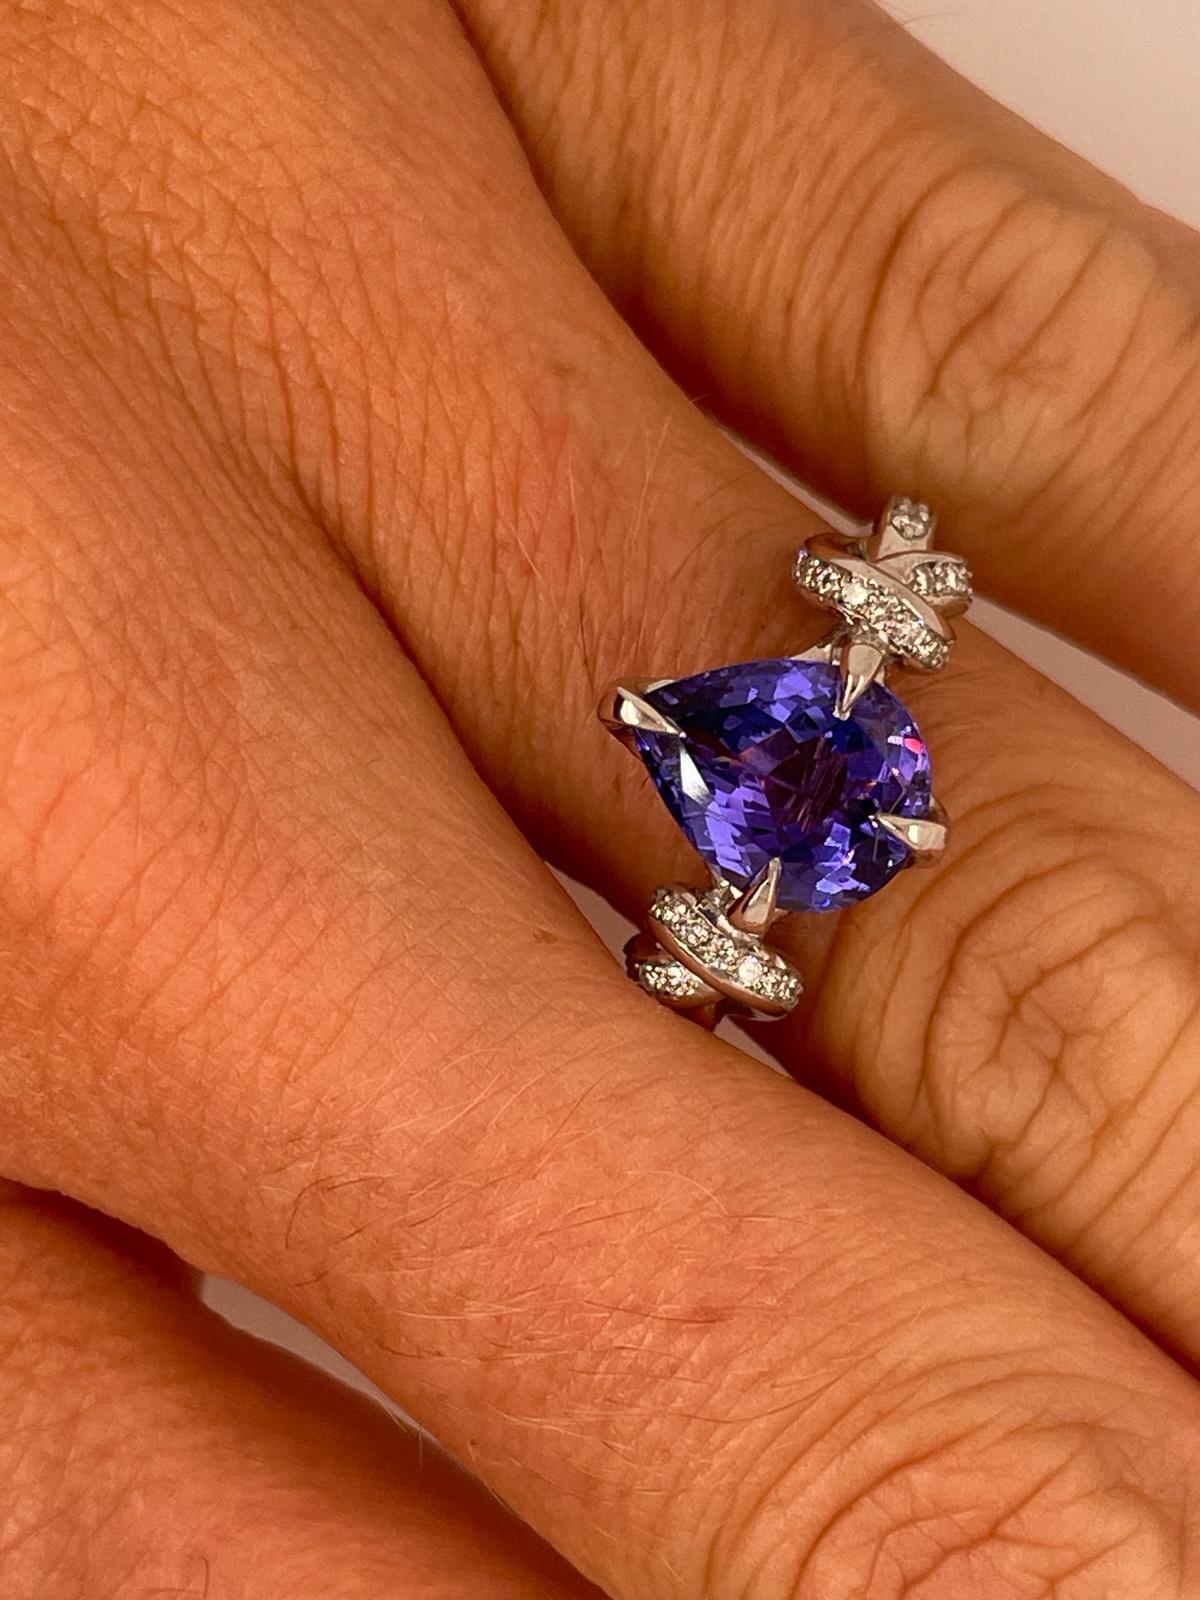 For Sale:  2ct tanzanite and diamond ring in platinum and rose gold  Forget me knot ring  18